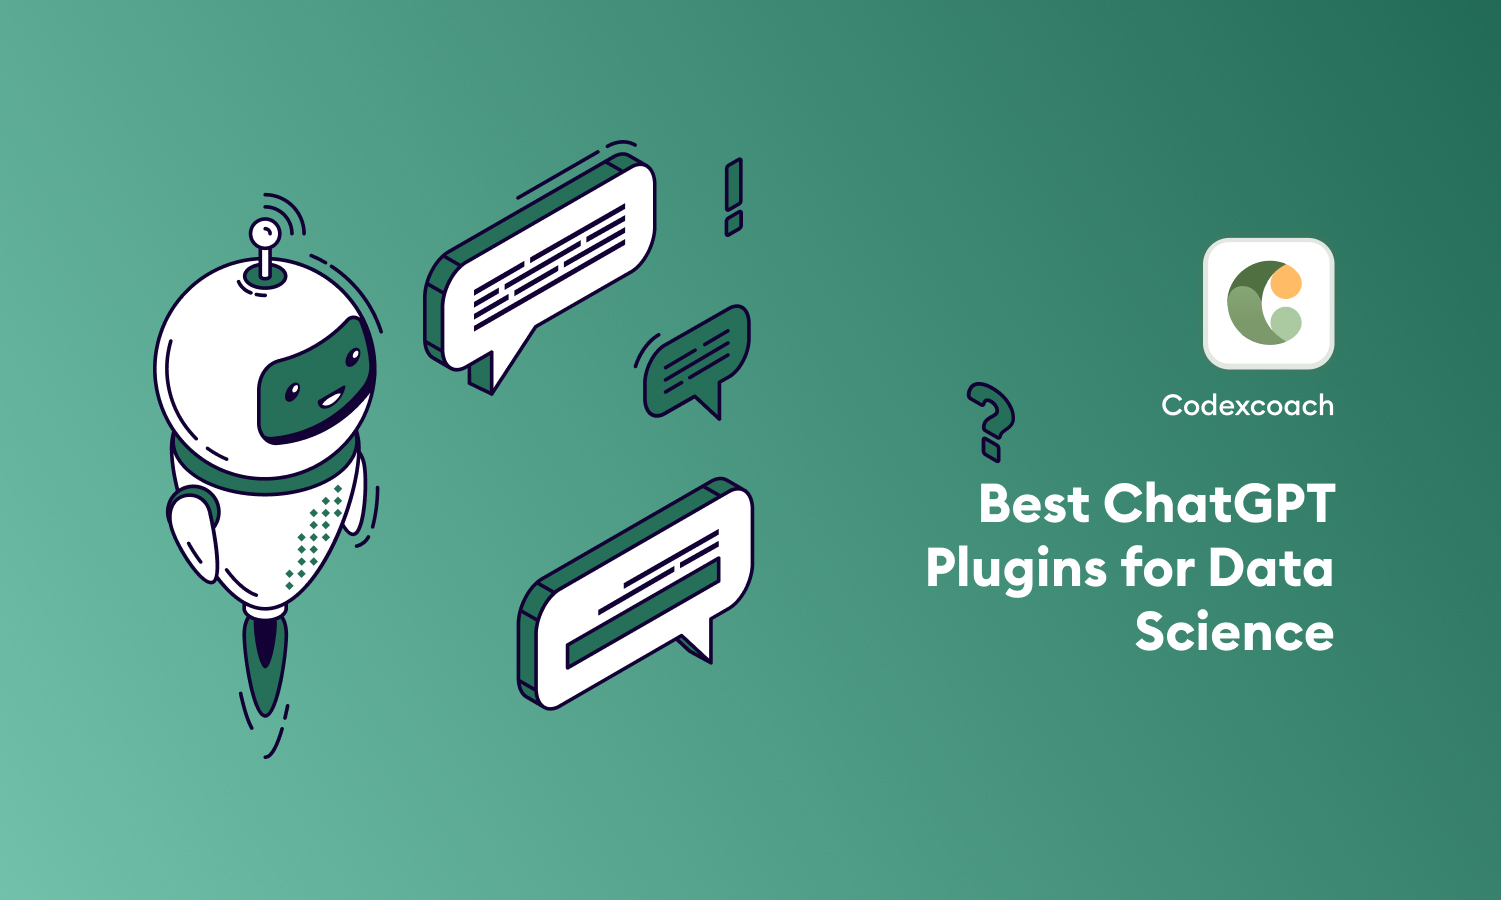 Best ChatGPT Plugins for Data Science